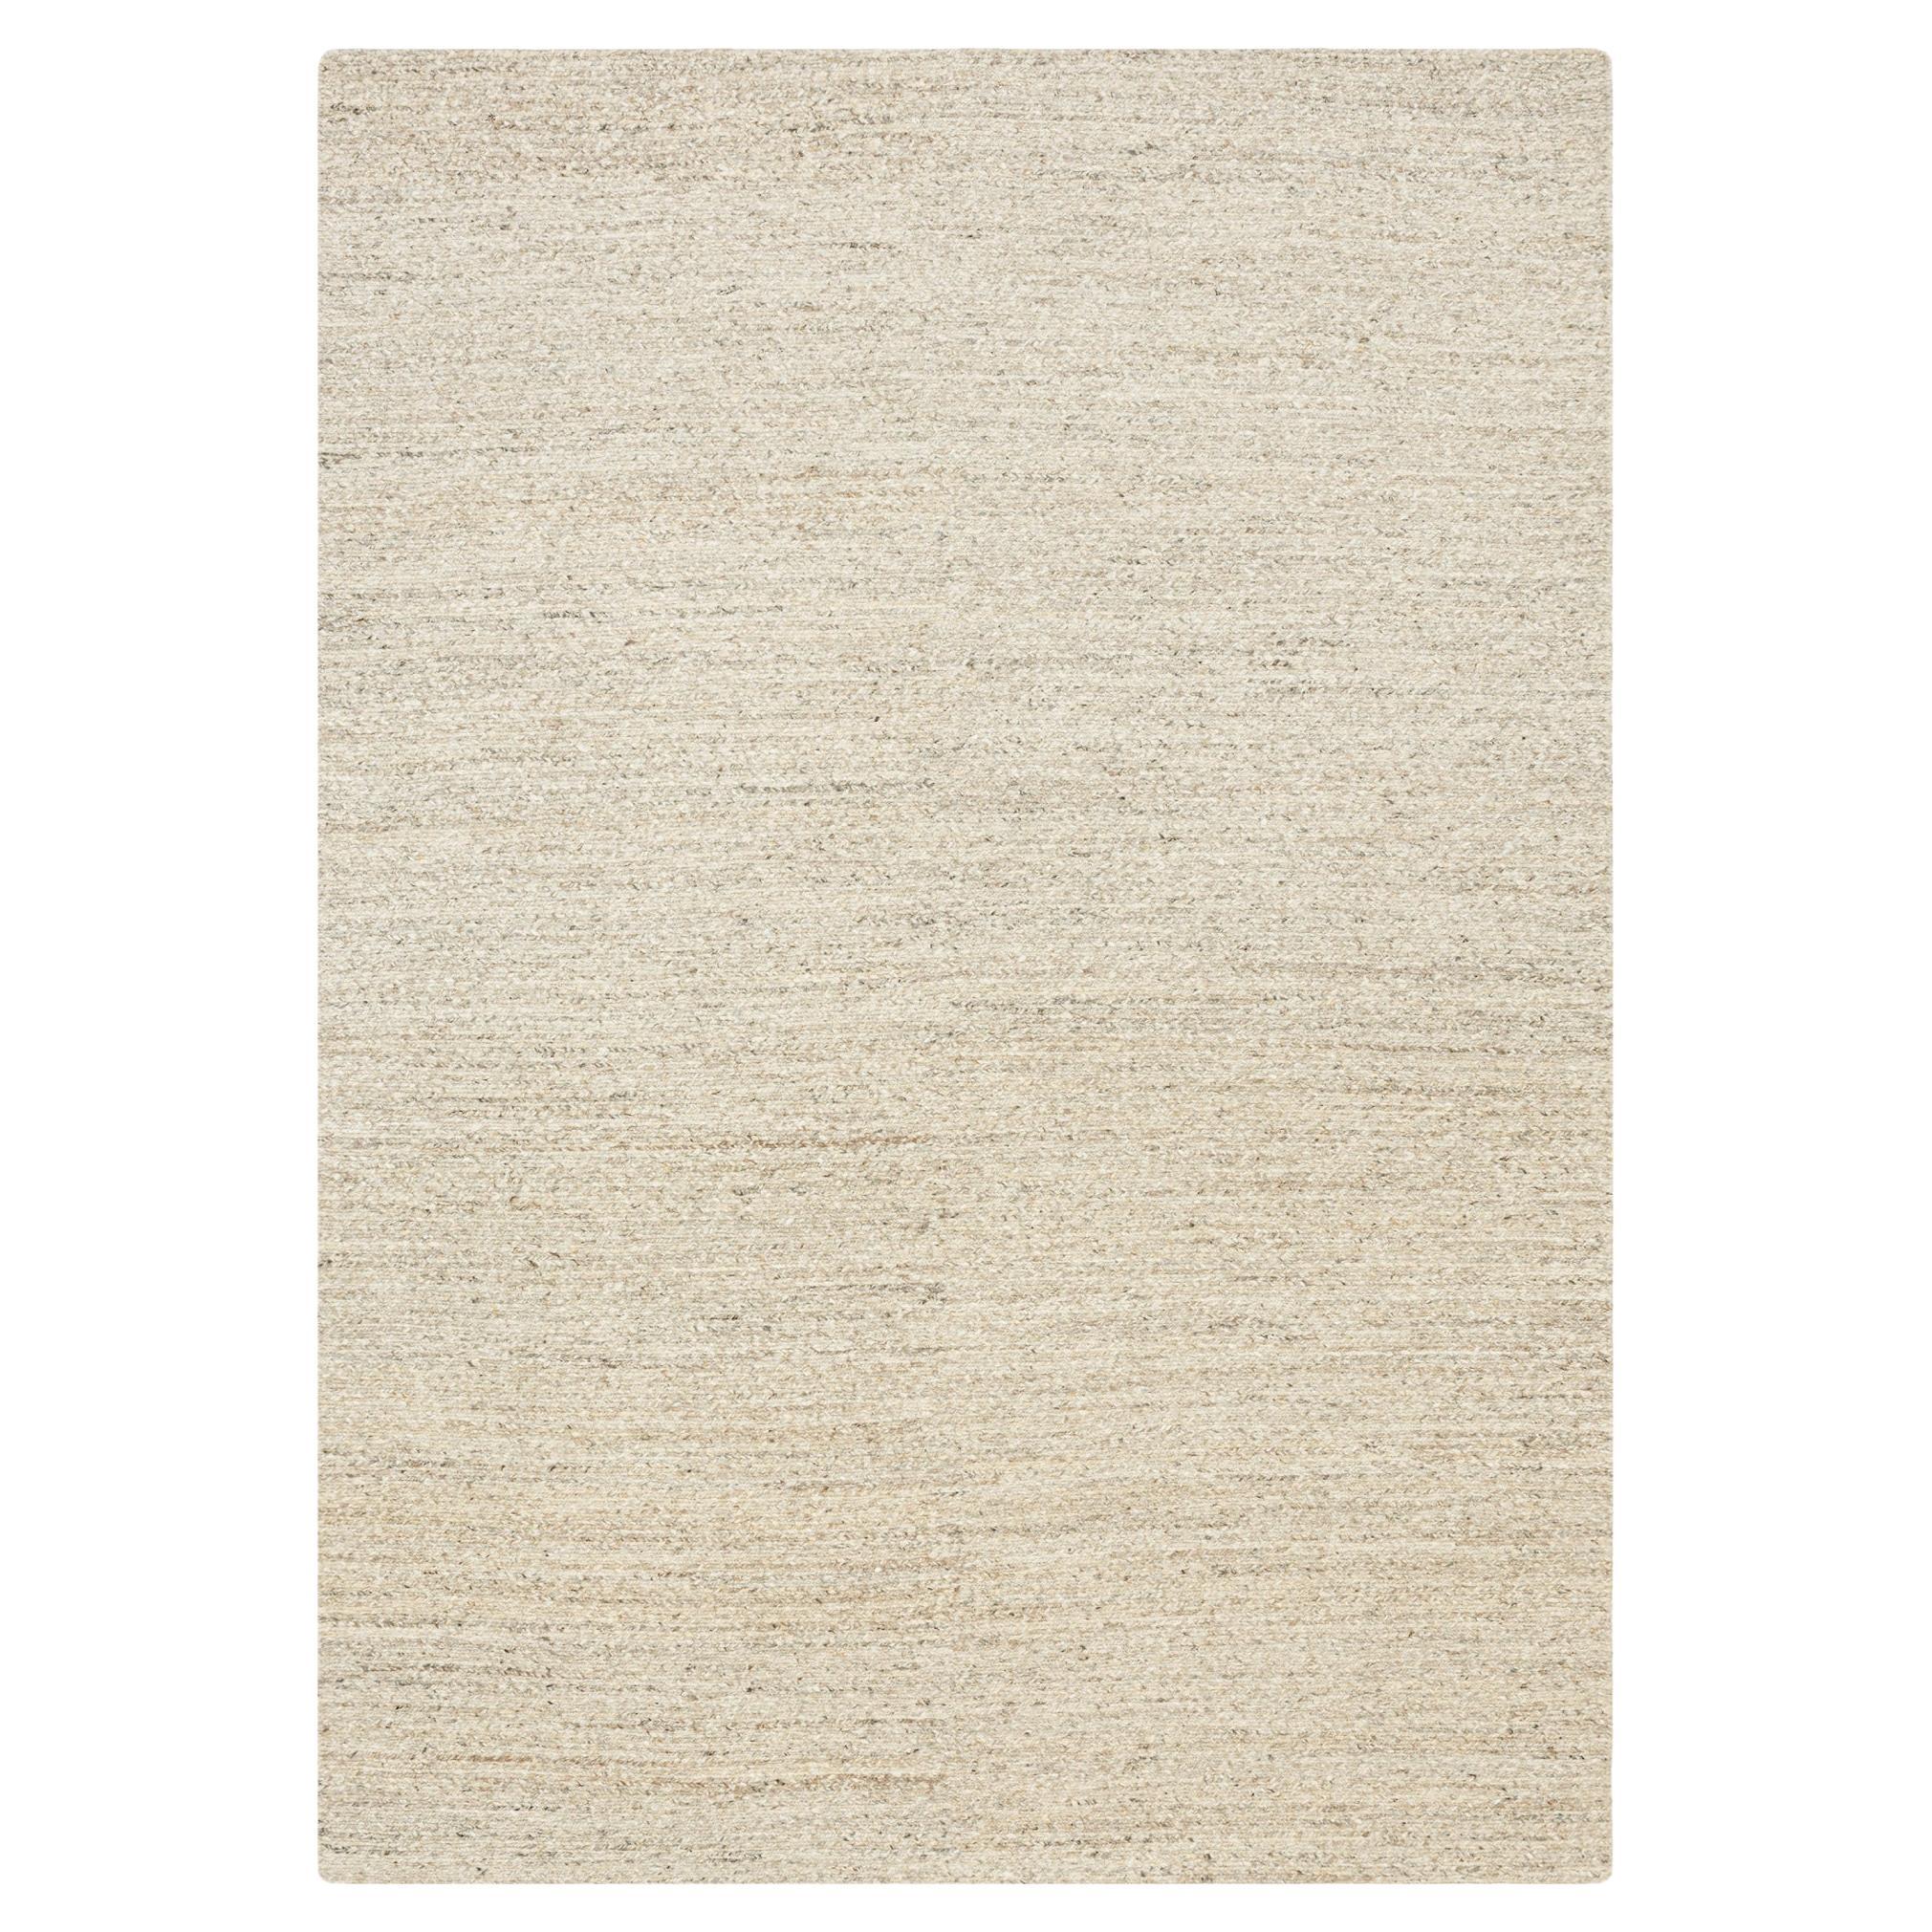 Chunky Sumac Natural Brown Flatweave Rug by Knots Rugs